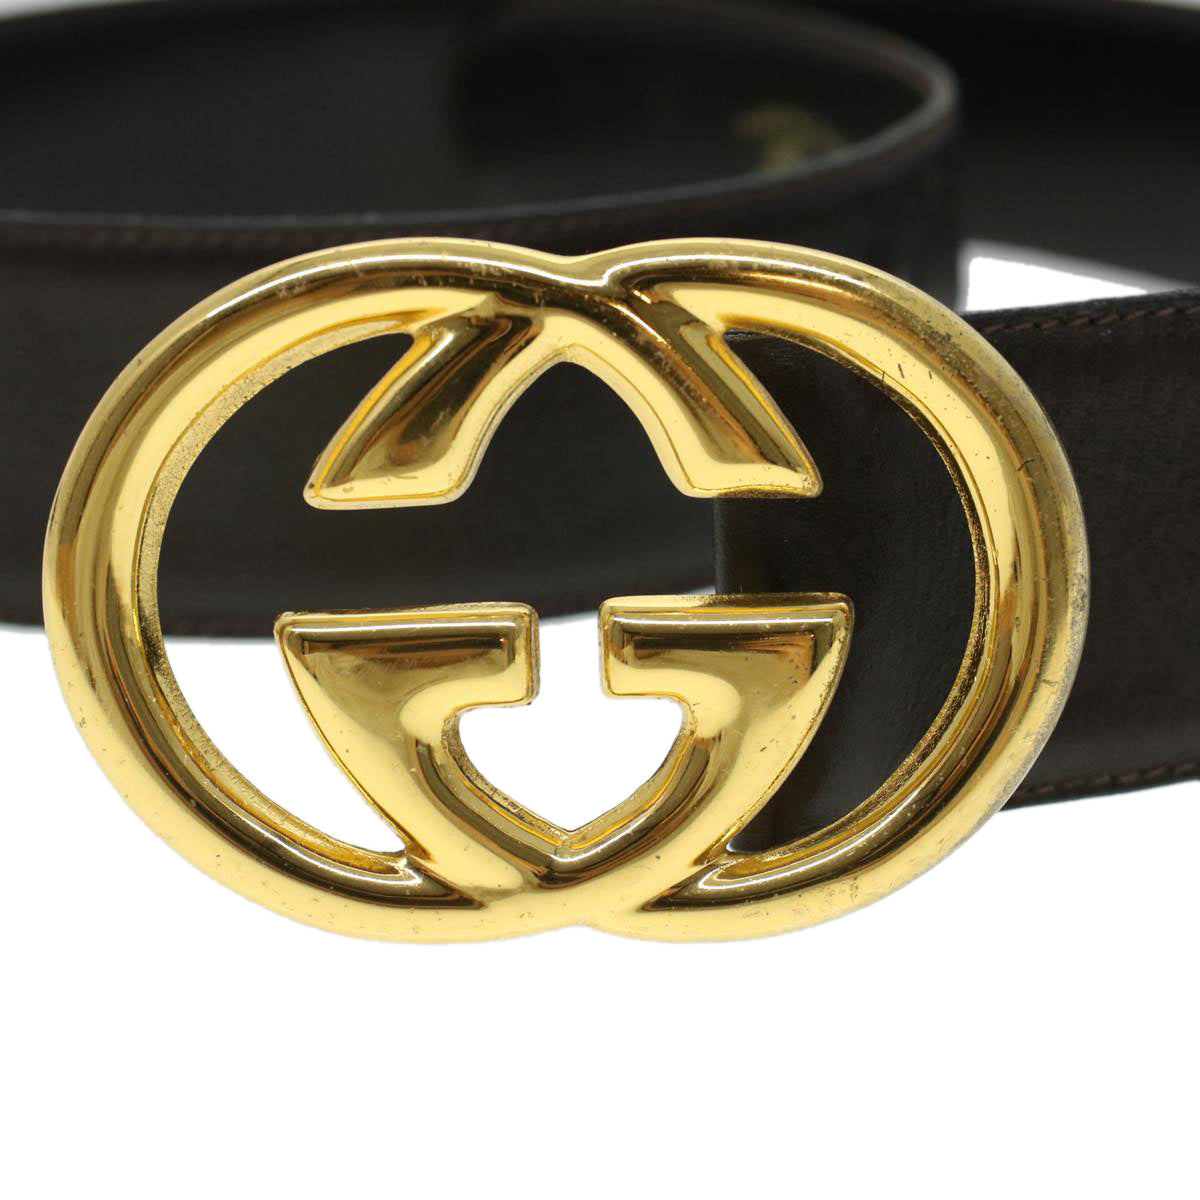 GUCCI Belt Leather 33.1"" Brown 52808/75 Auth am4354